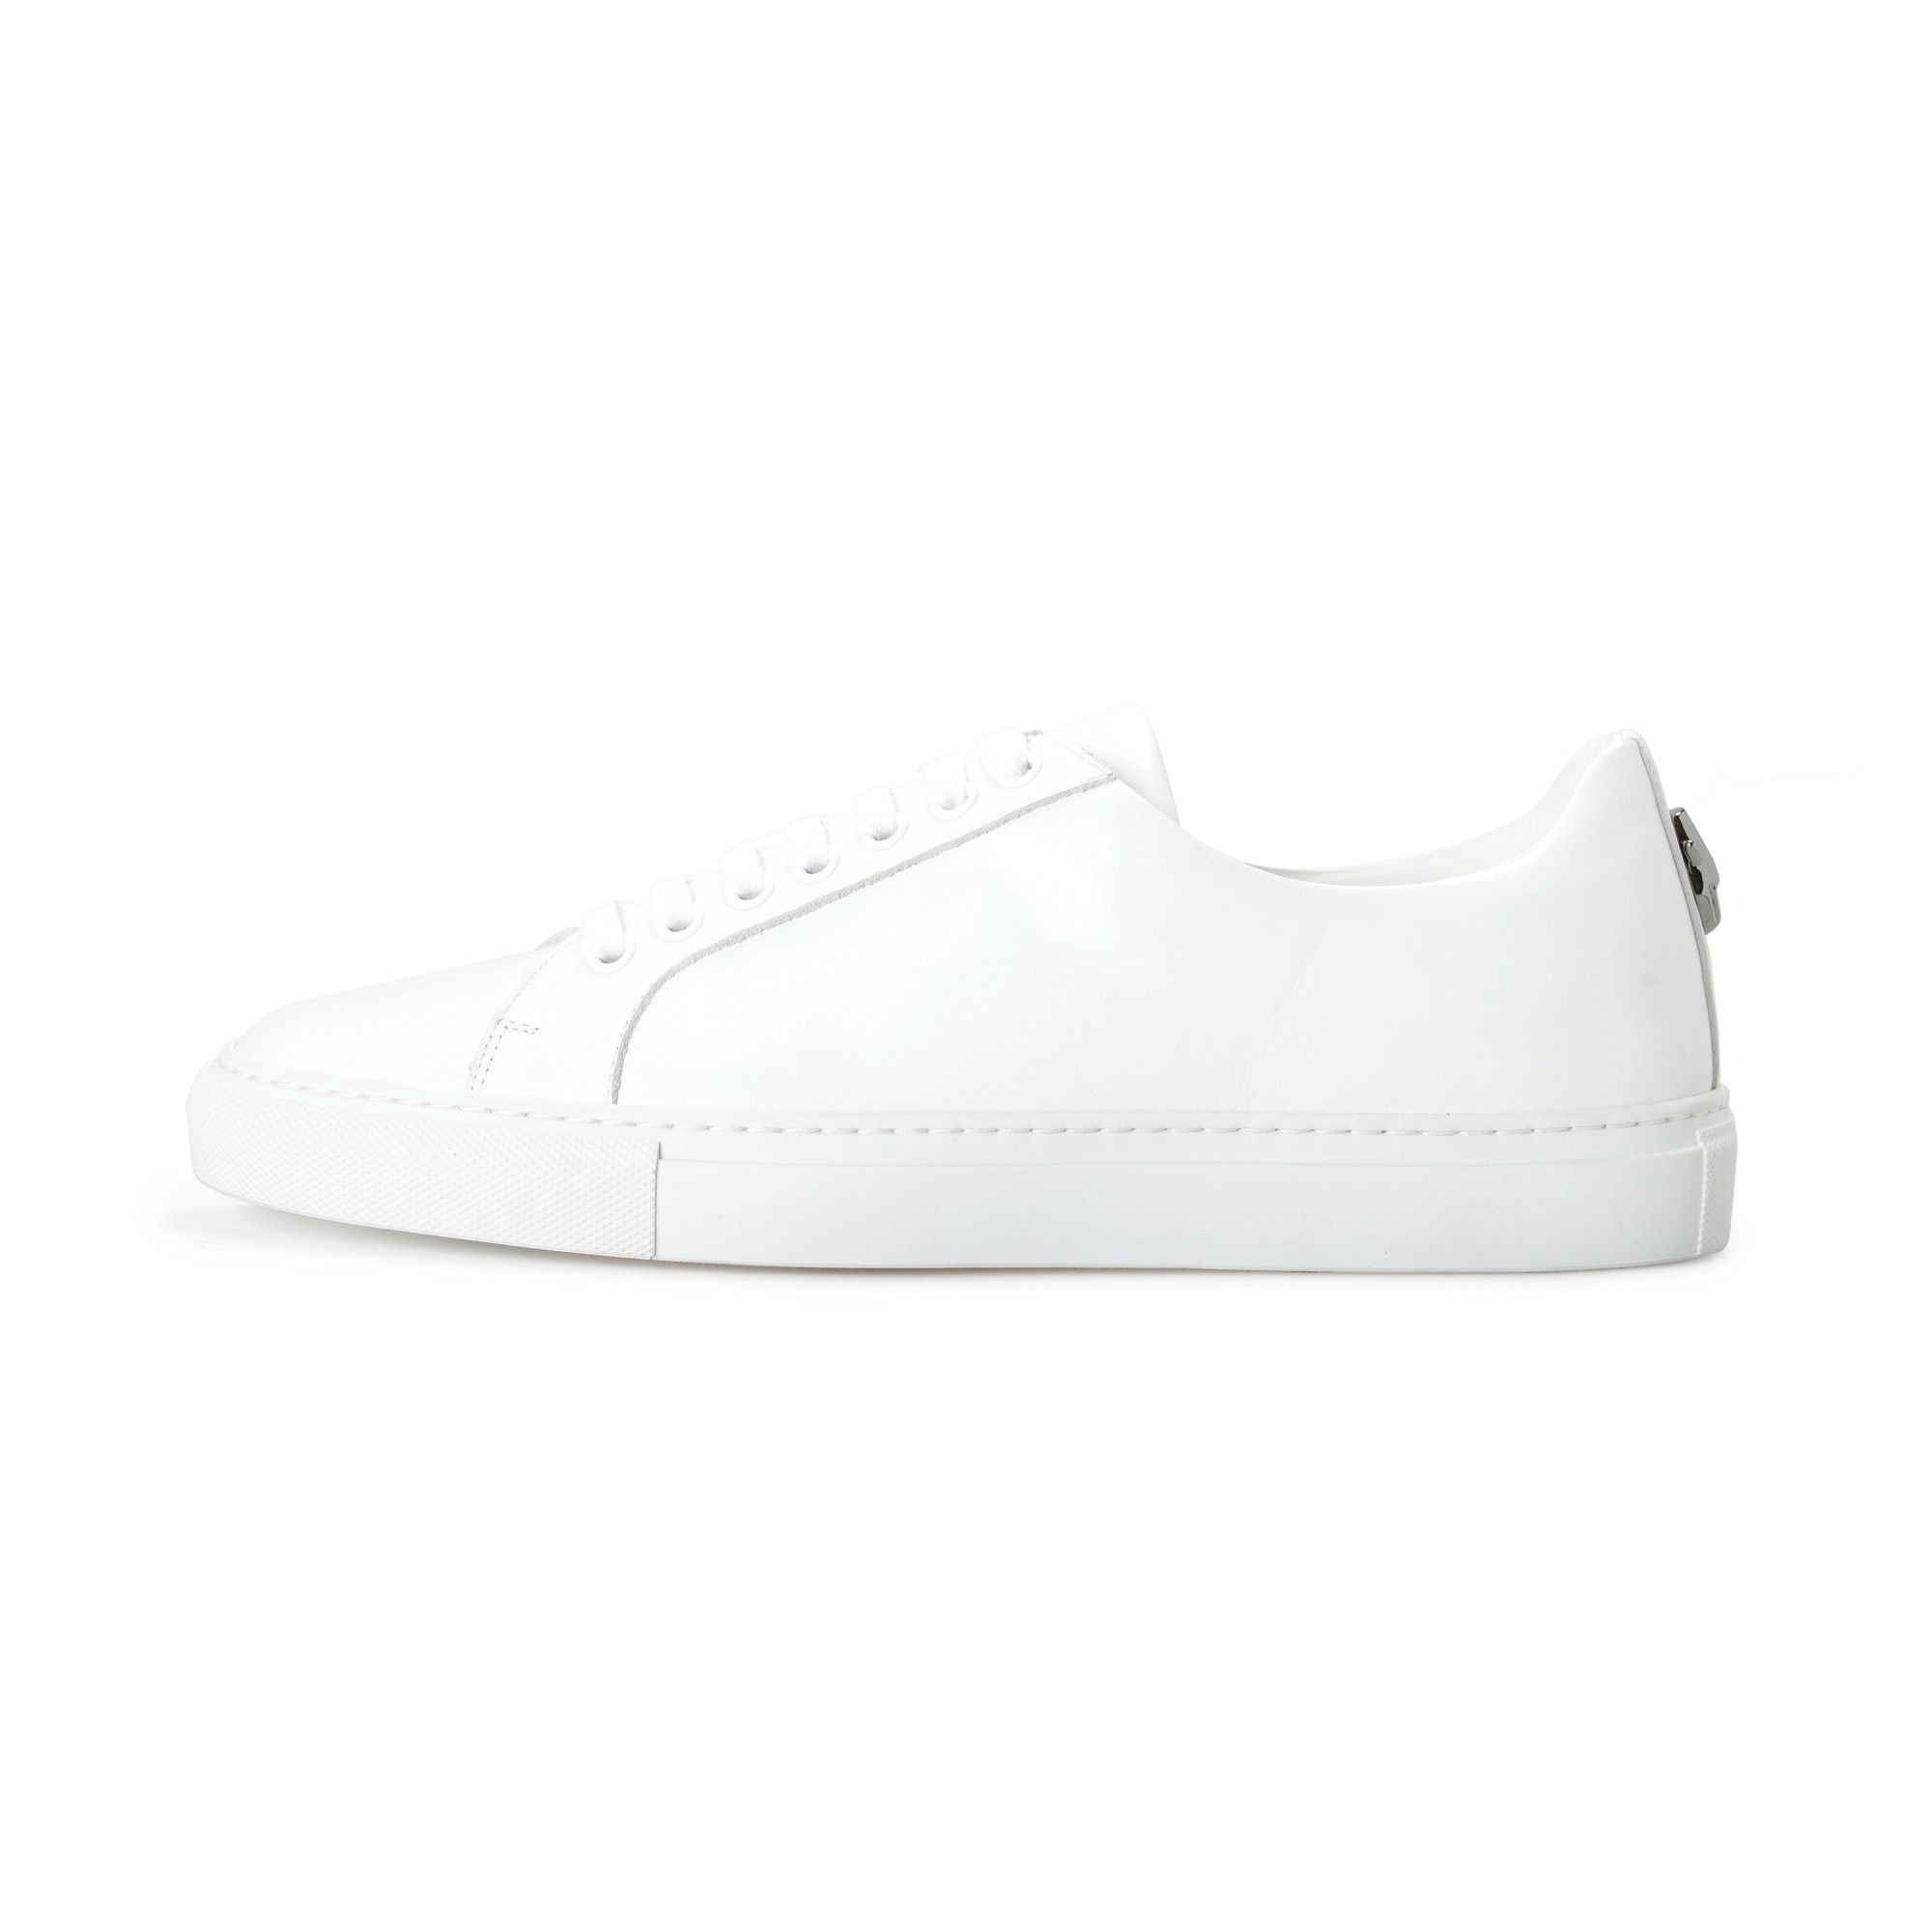 Cavalli Class Men's White Leather Fashion Sneakers Shoes